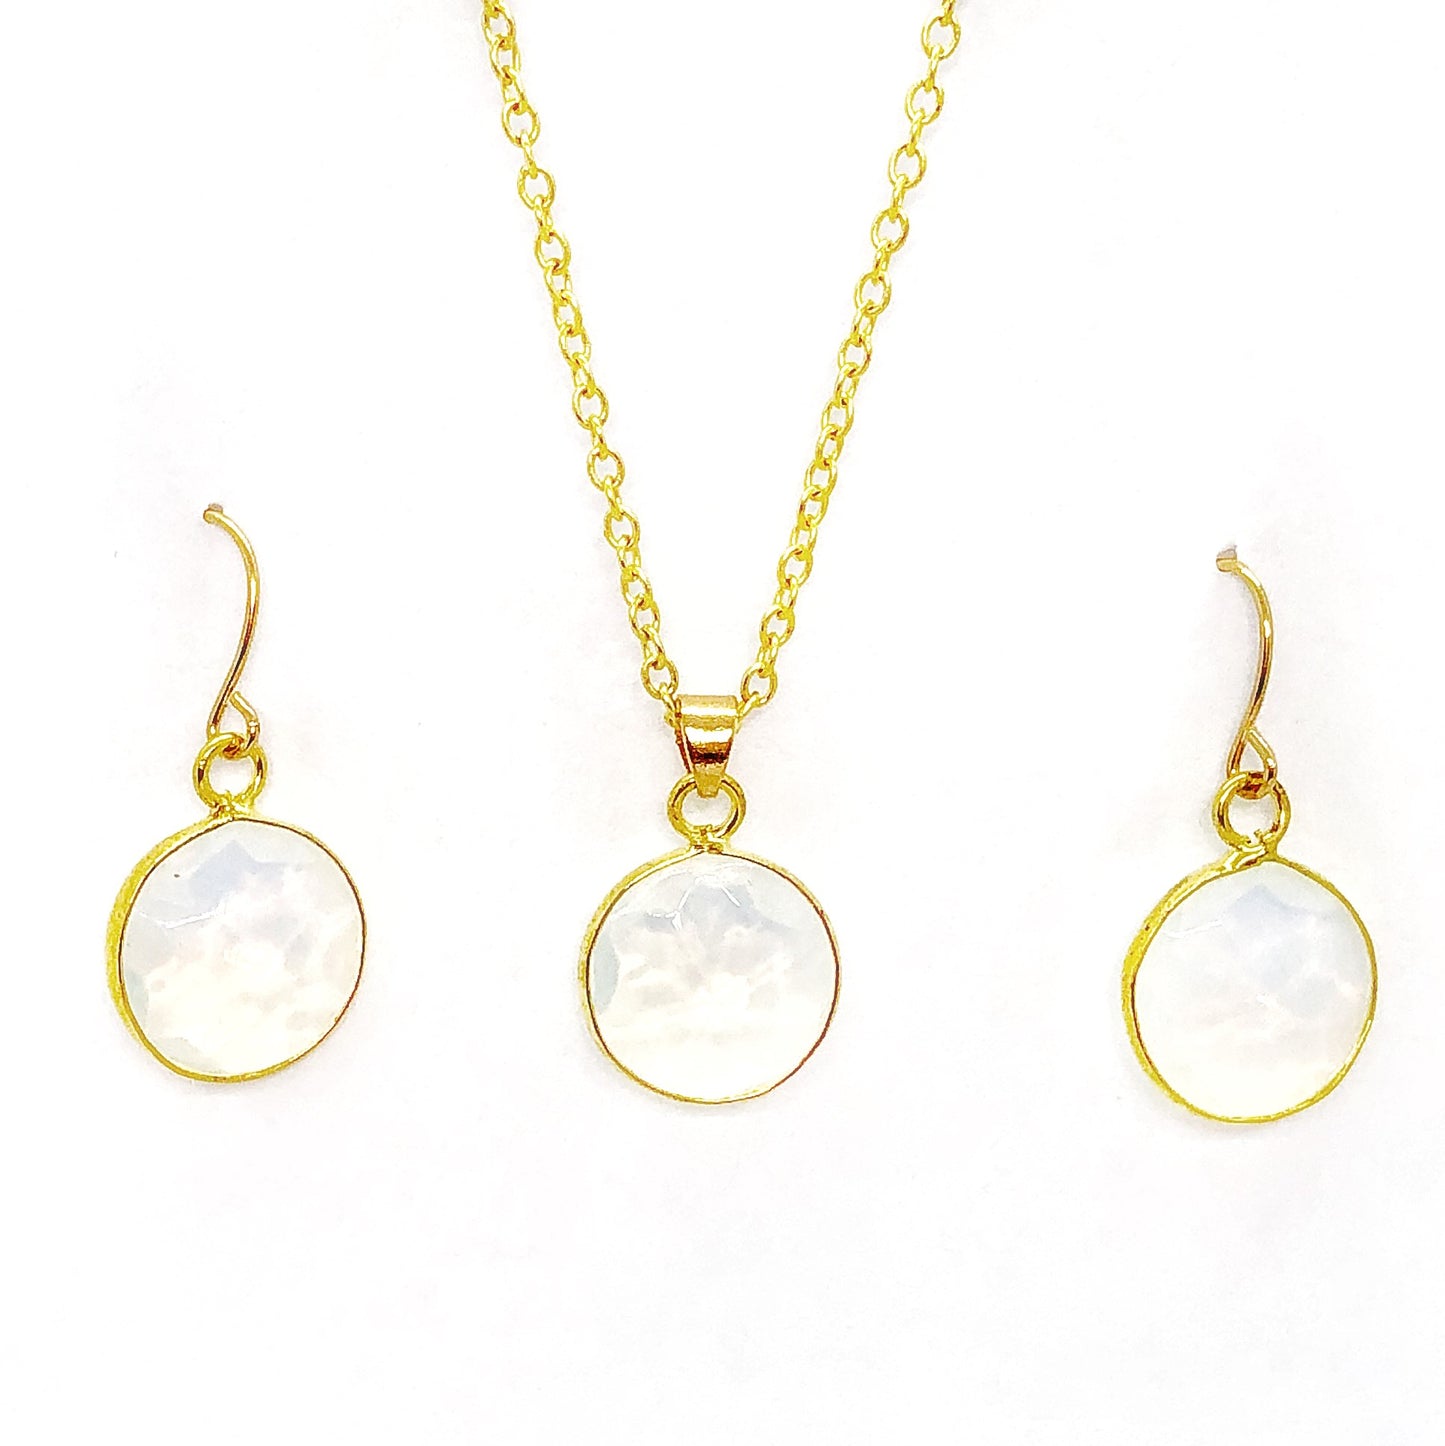 Moonstone Pearlescent Earrings and Necklace Set for Women